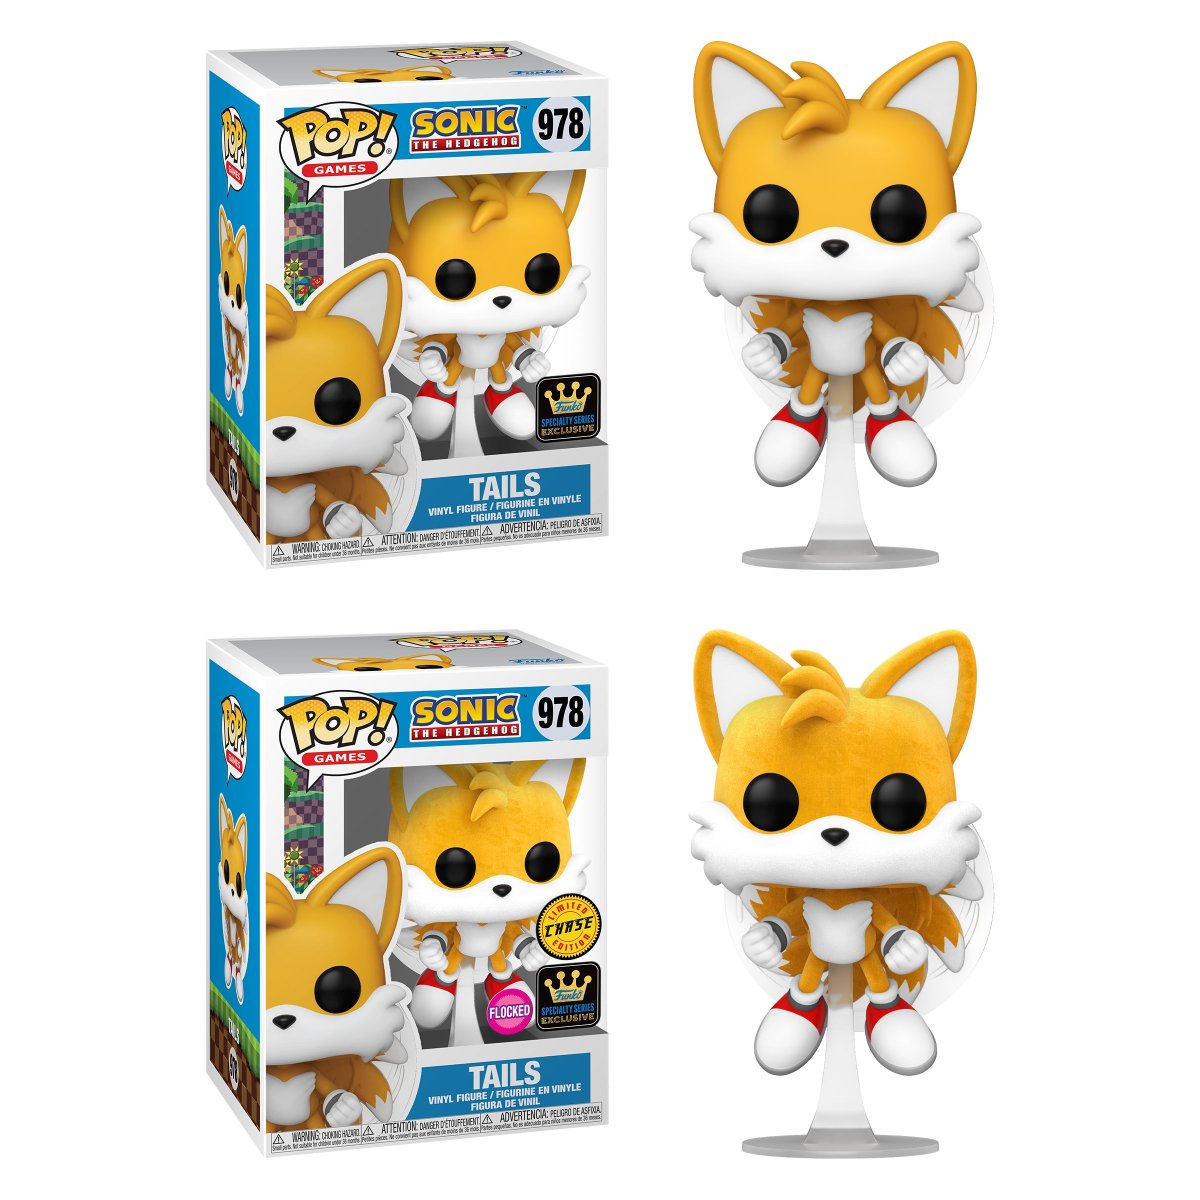 Preorder Now: Specialty Series Exclusive Tails Funko Pop! Vinyl with Flocked Chase 🌎 Ent Earth: ee.toys/RV4CBA 🎮 GameStop: finderz.info/3V3LvfZ 🦇 Hot Topic: finderz.info/4bX1HXh * No Charge Until it Ships #Ad #SonicTheHedgehog #Funko #FunkoPop #FunkoPops